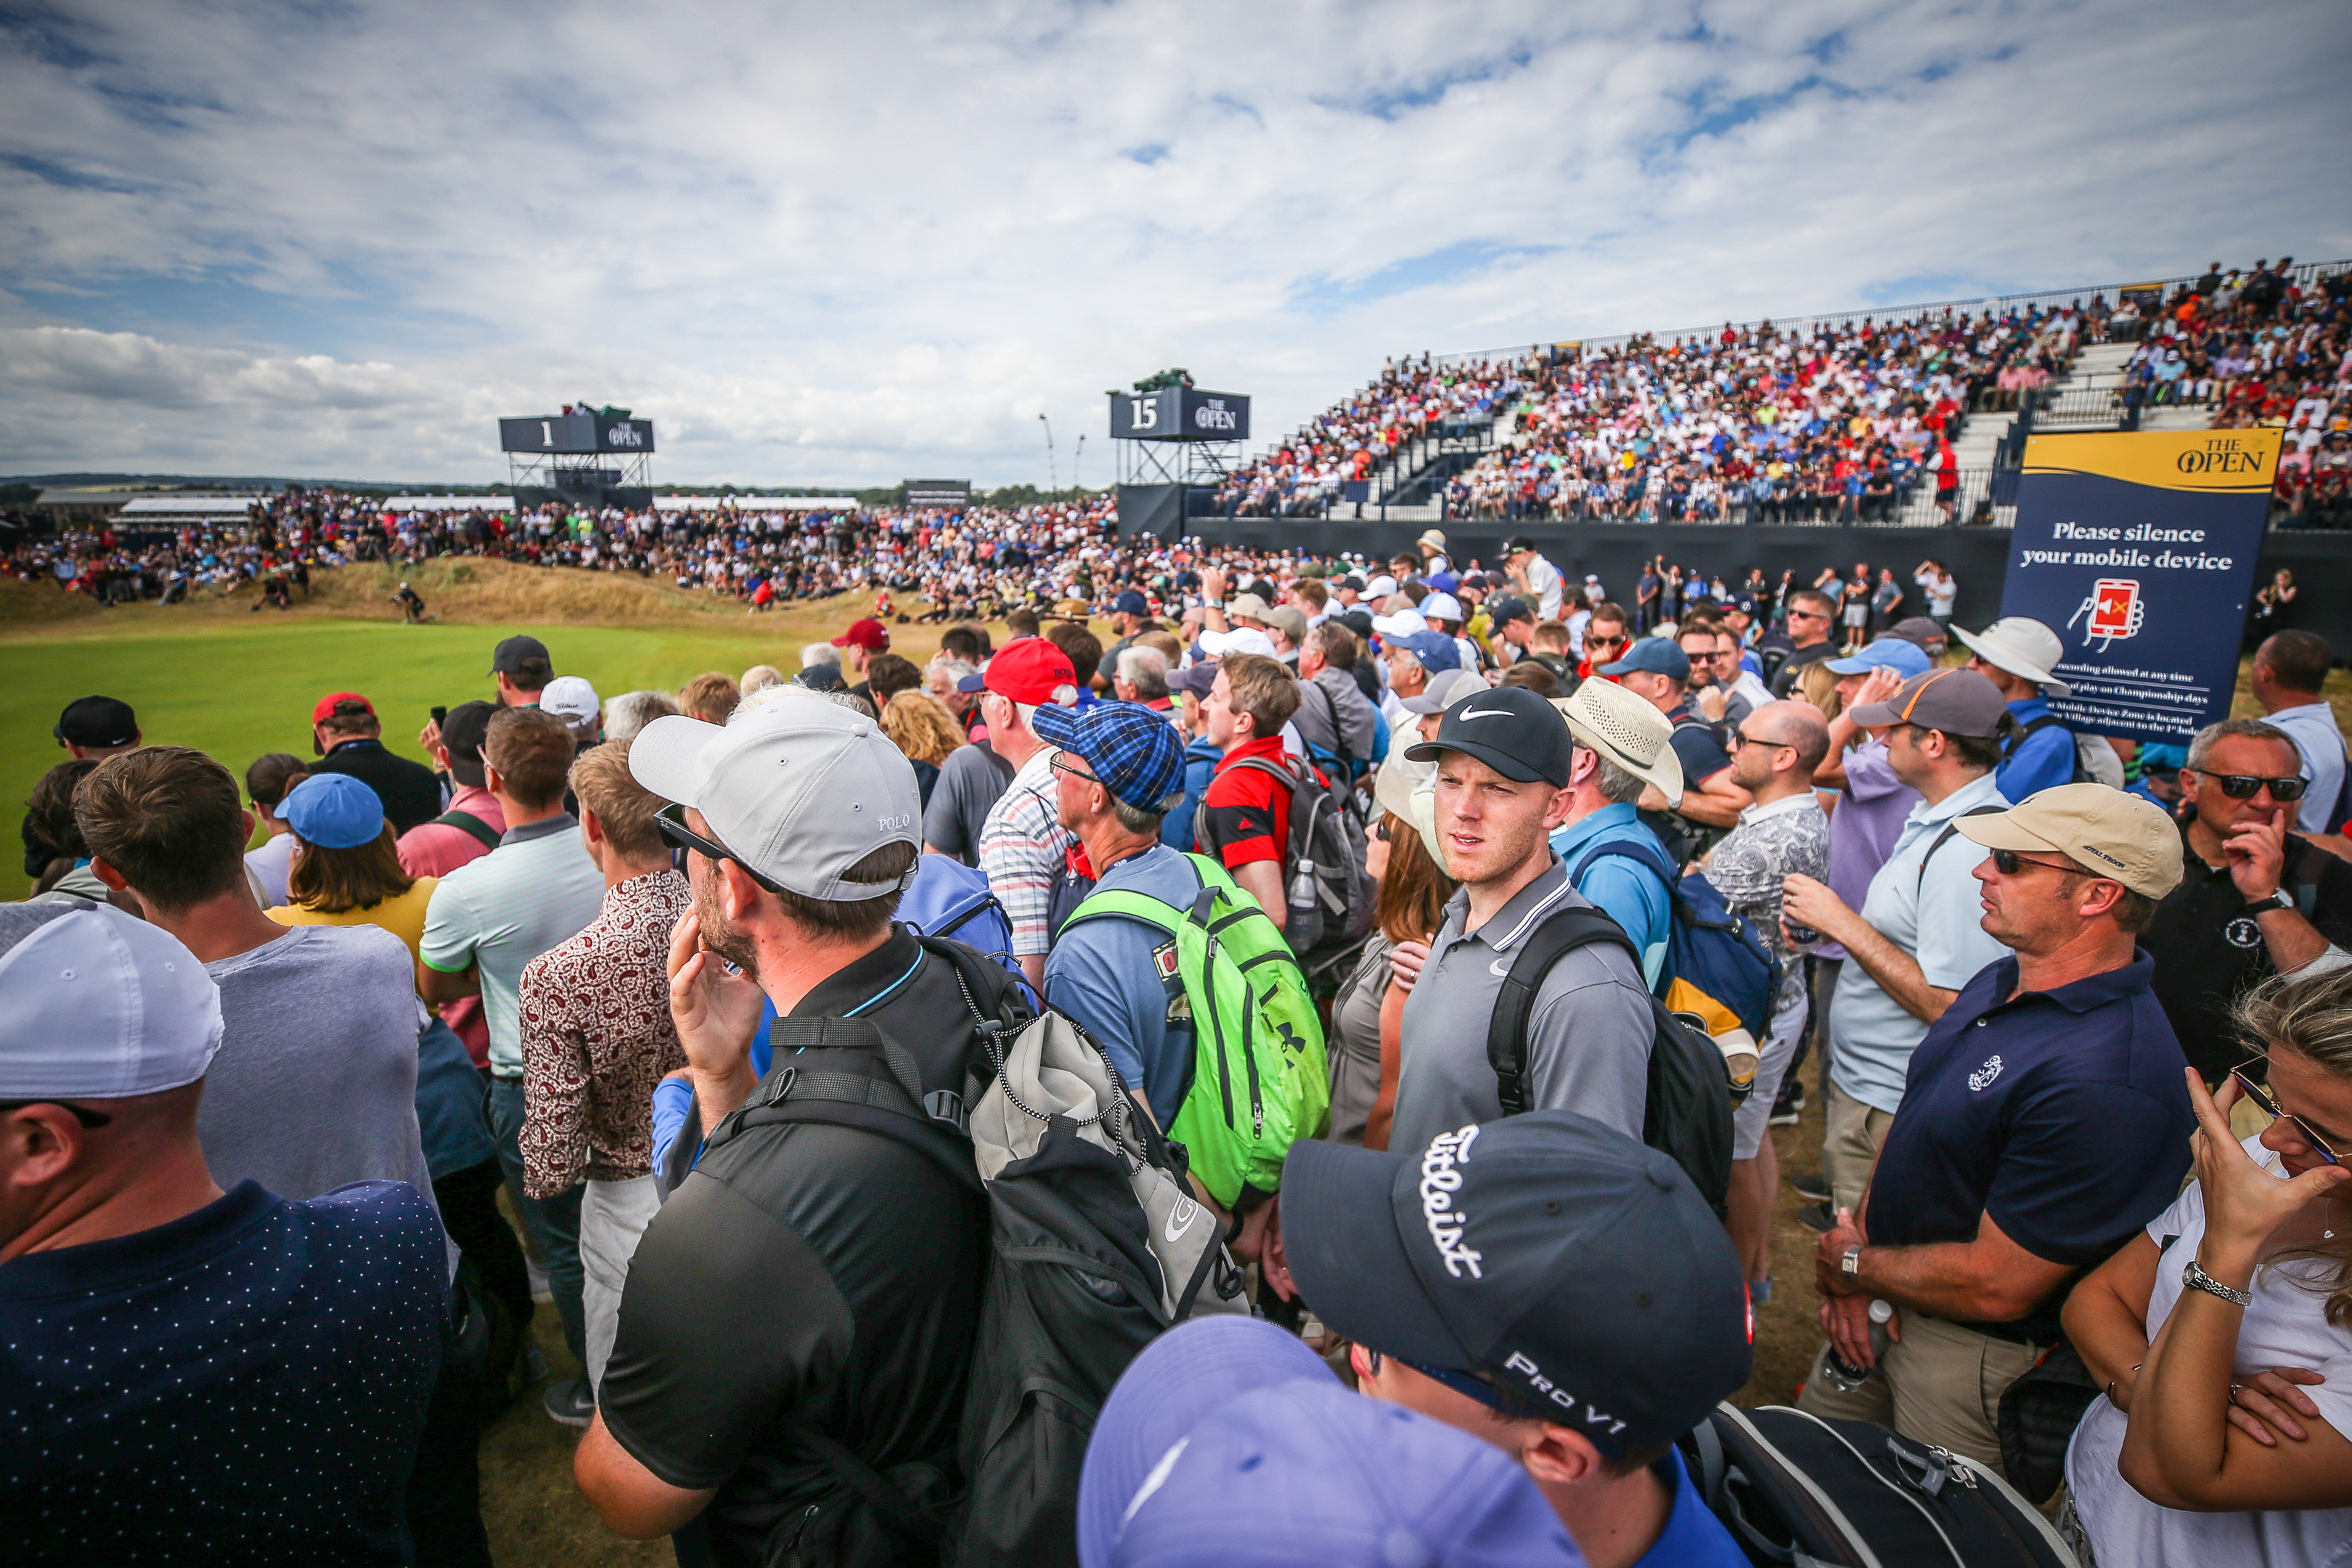 Carnoustie accommodated a record 172,000 spectators for the venue at last year's Open.